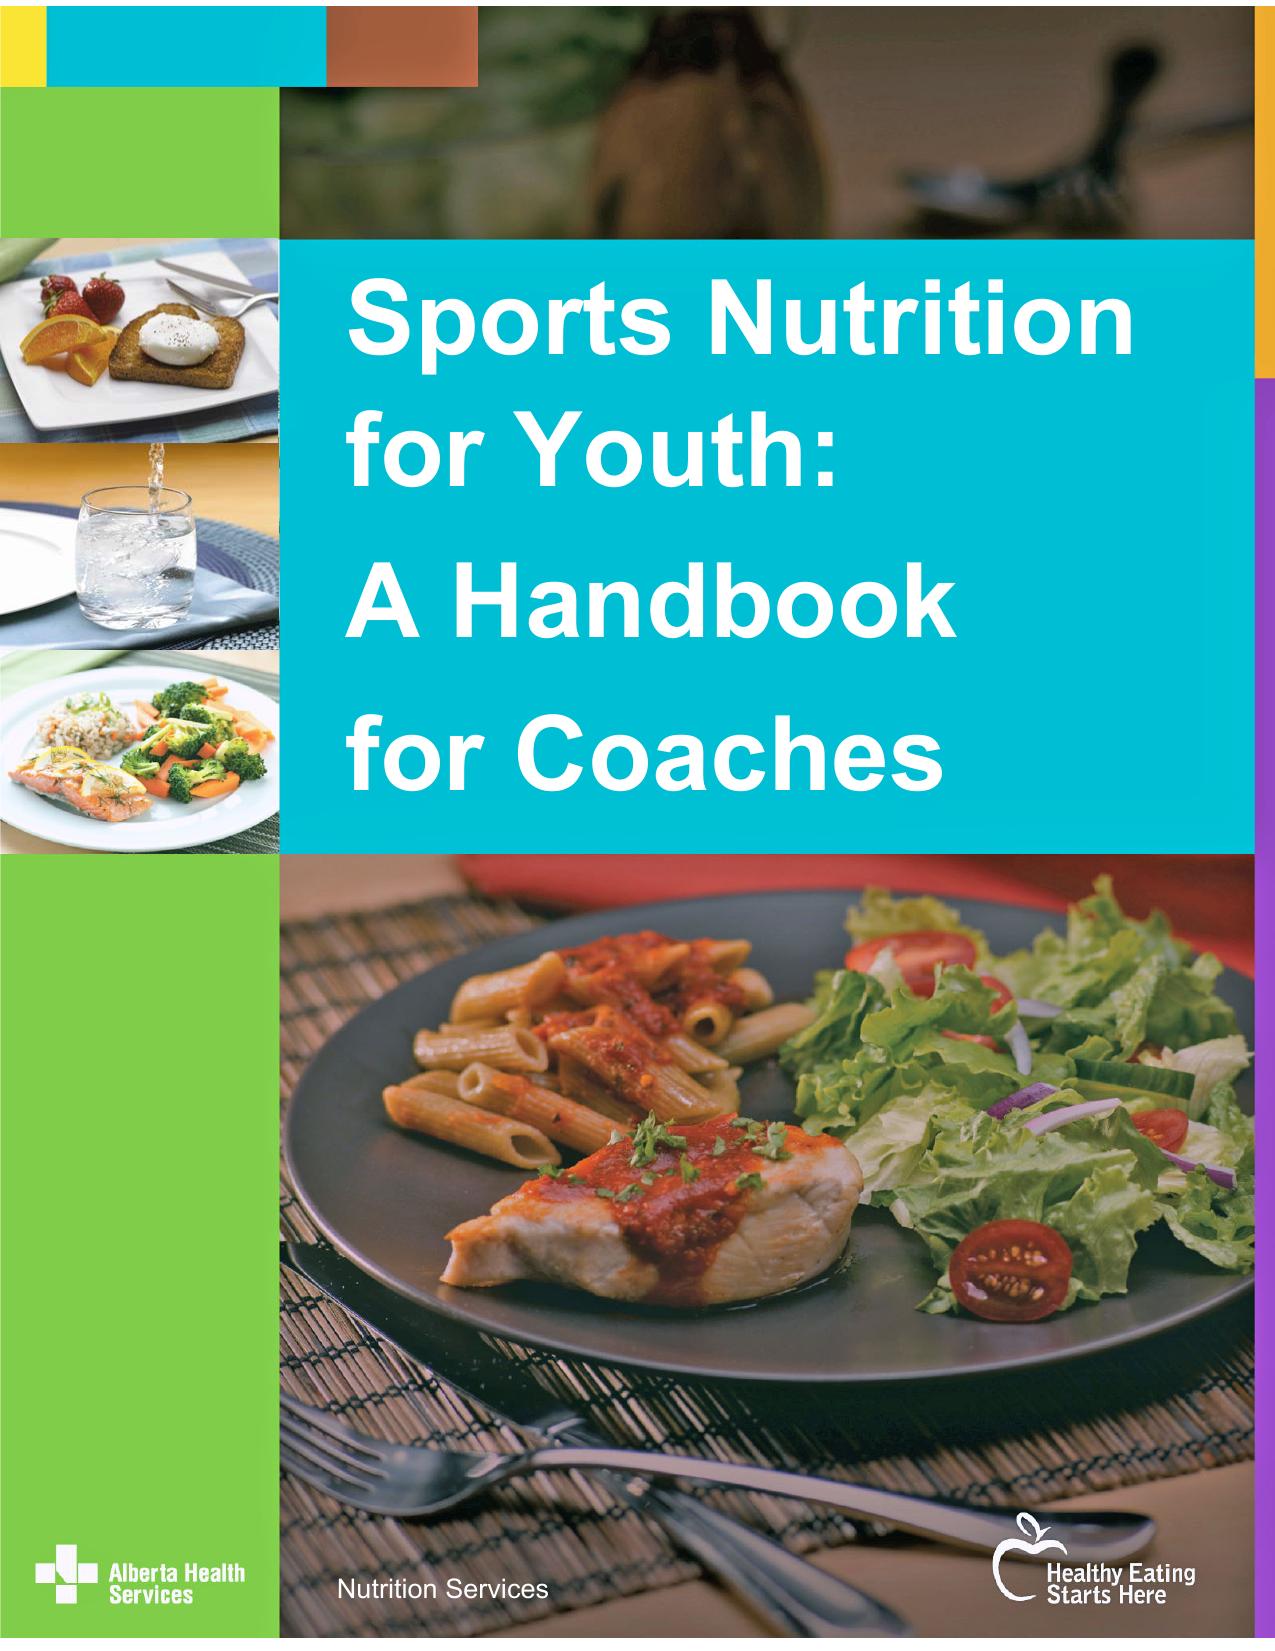 Sports Nutrition for Youth: A Handbook for Coaches